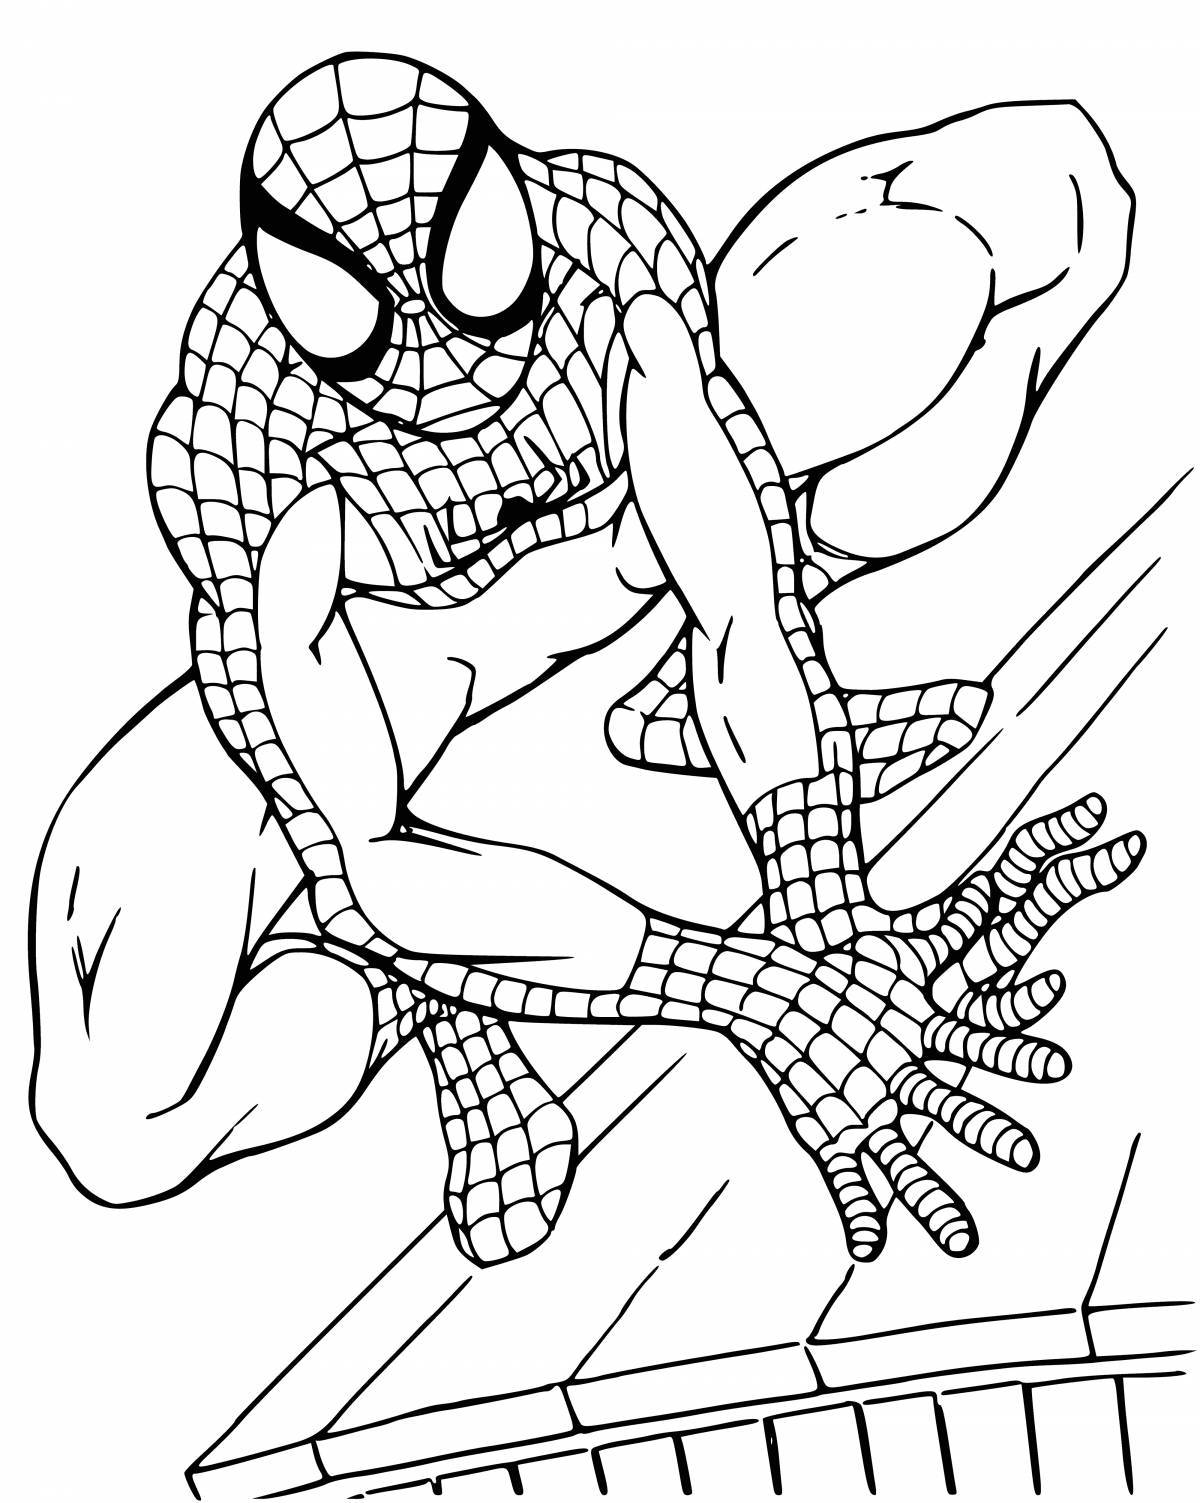 Glorious Spider-Man coloring pages for boys